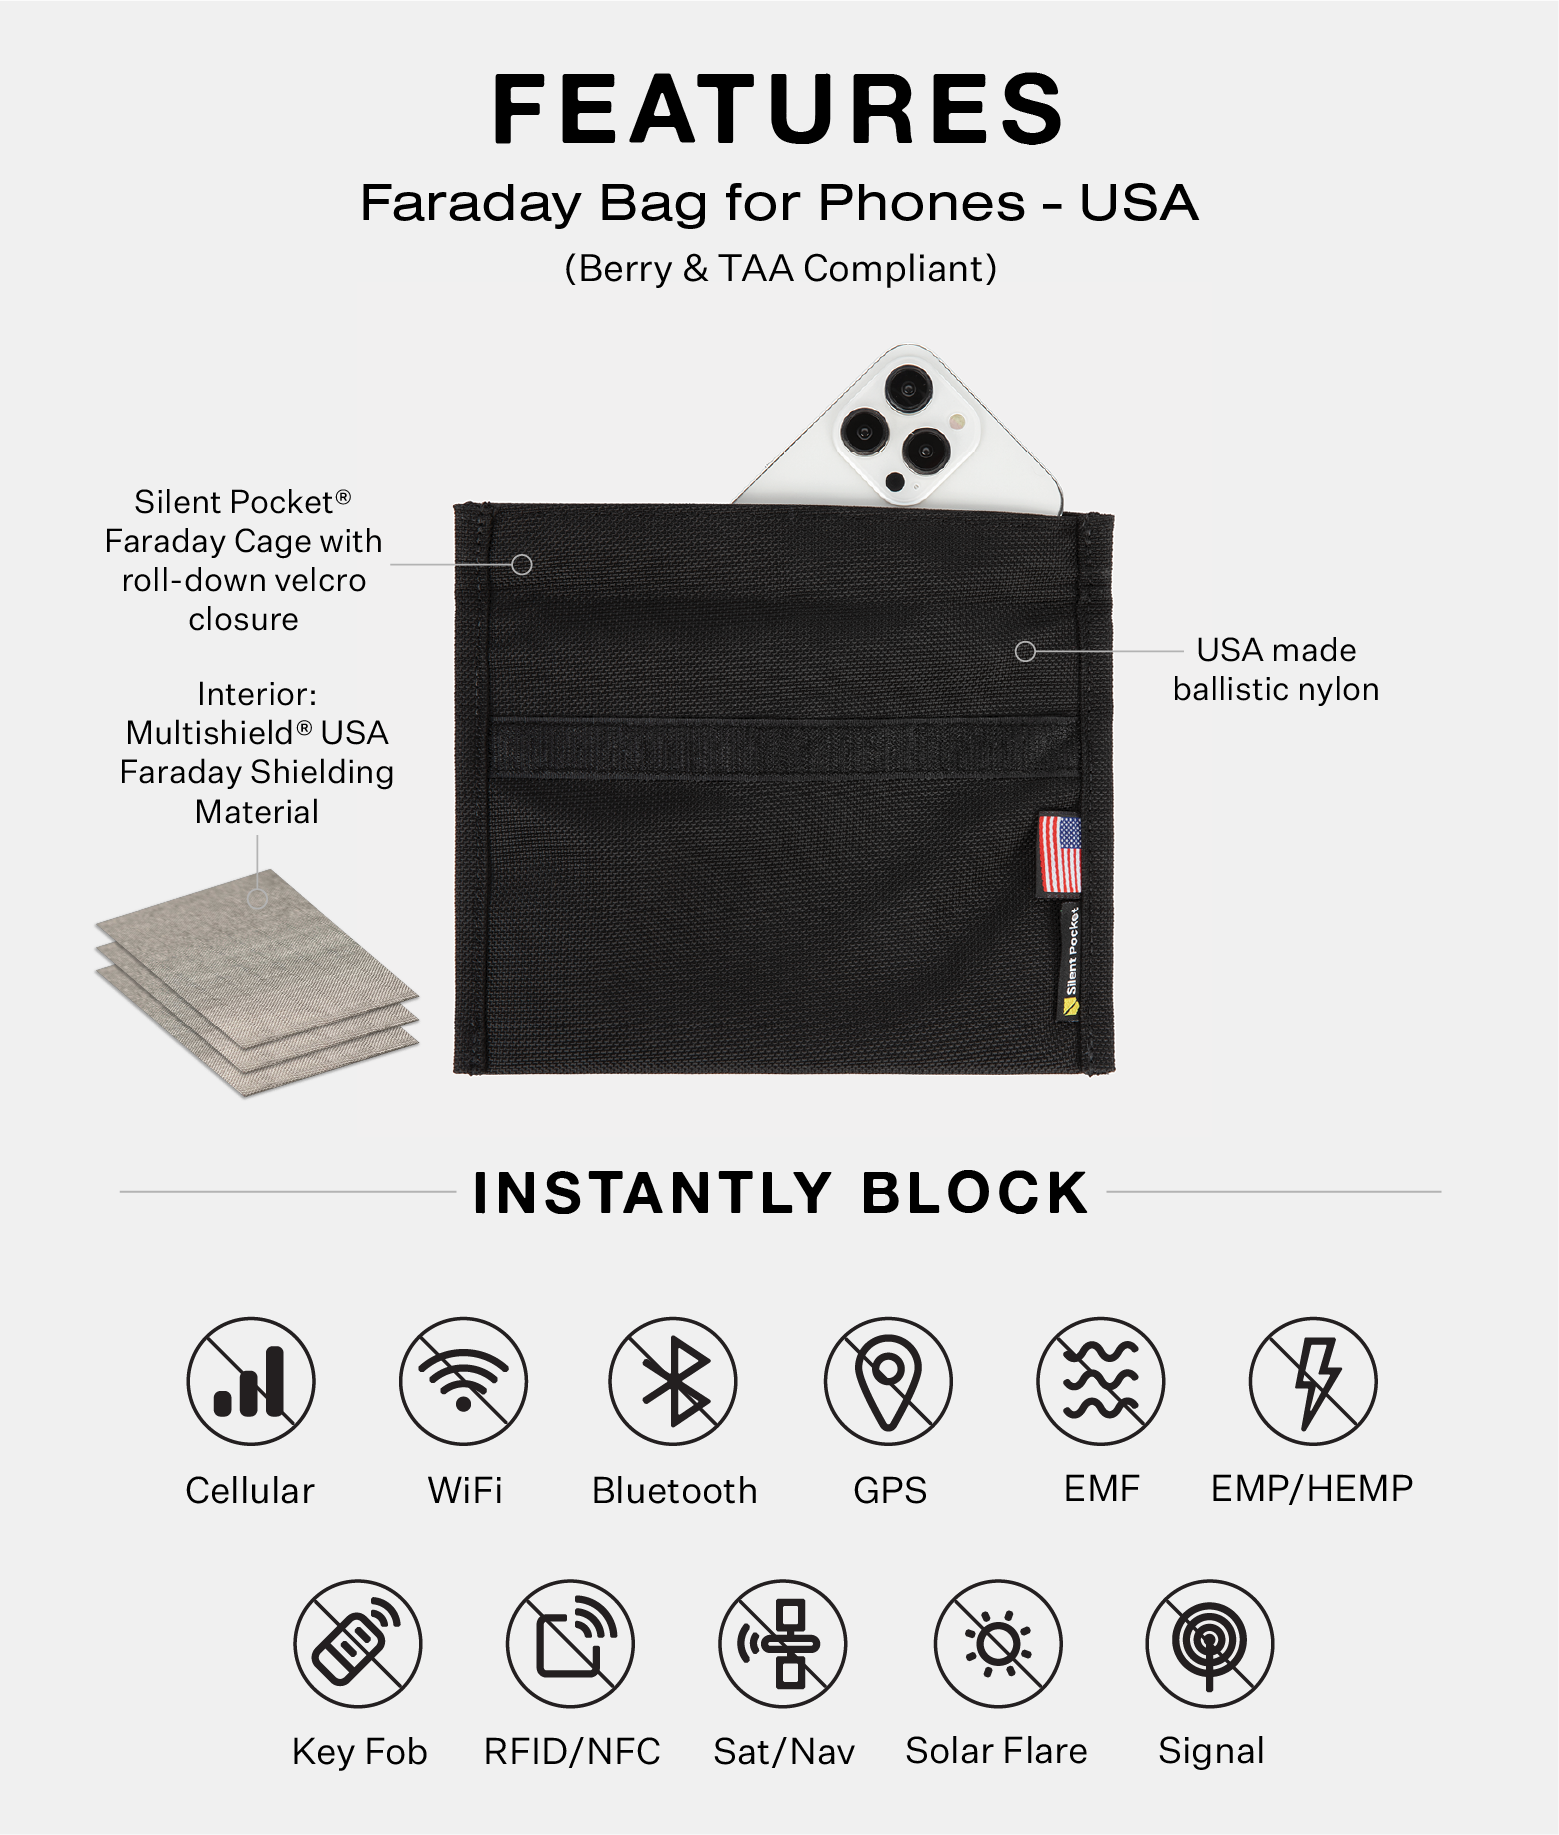  Silent Pocket SLNT Faraday Bag Leather Smartphone Sleeve Signal  Blocking Device Shielding for iPhone, Samsung Galaxy, Most Phones,  Anti-Hacking (Black Leather, Medium) : Everything Else